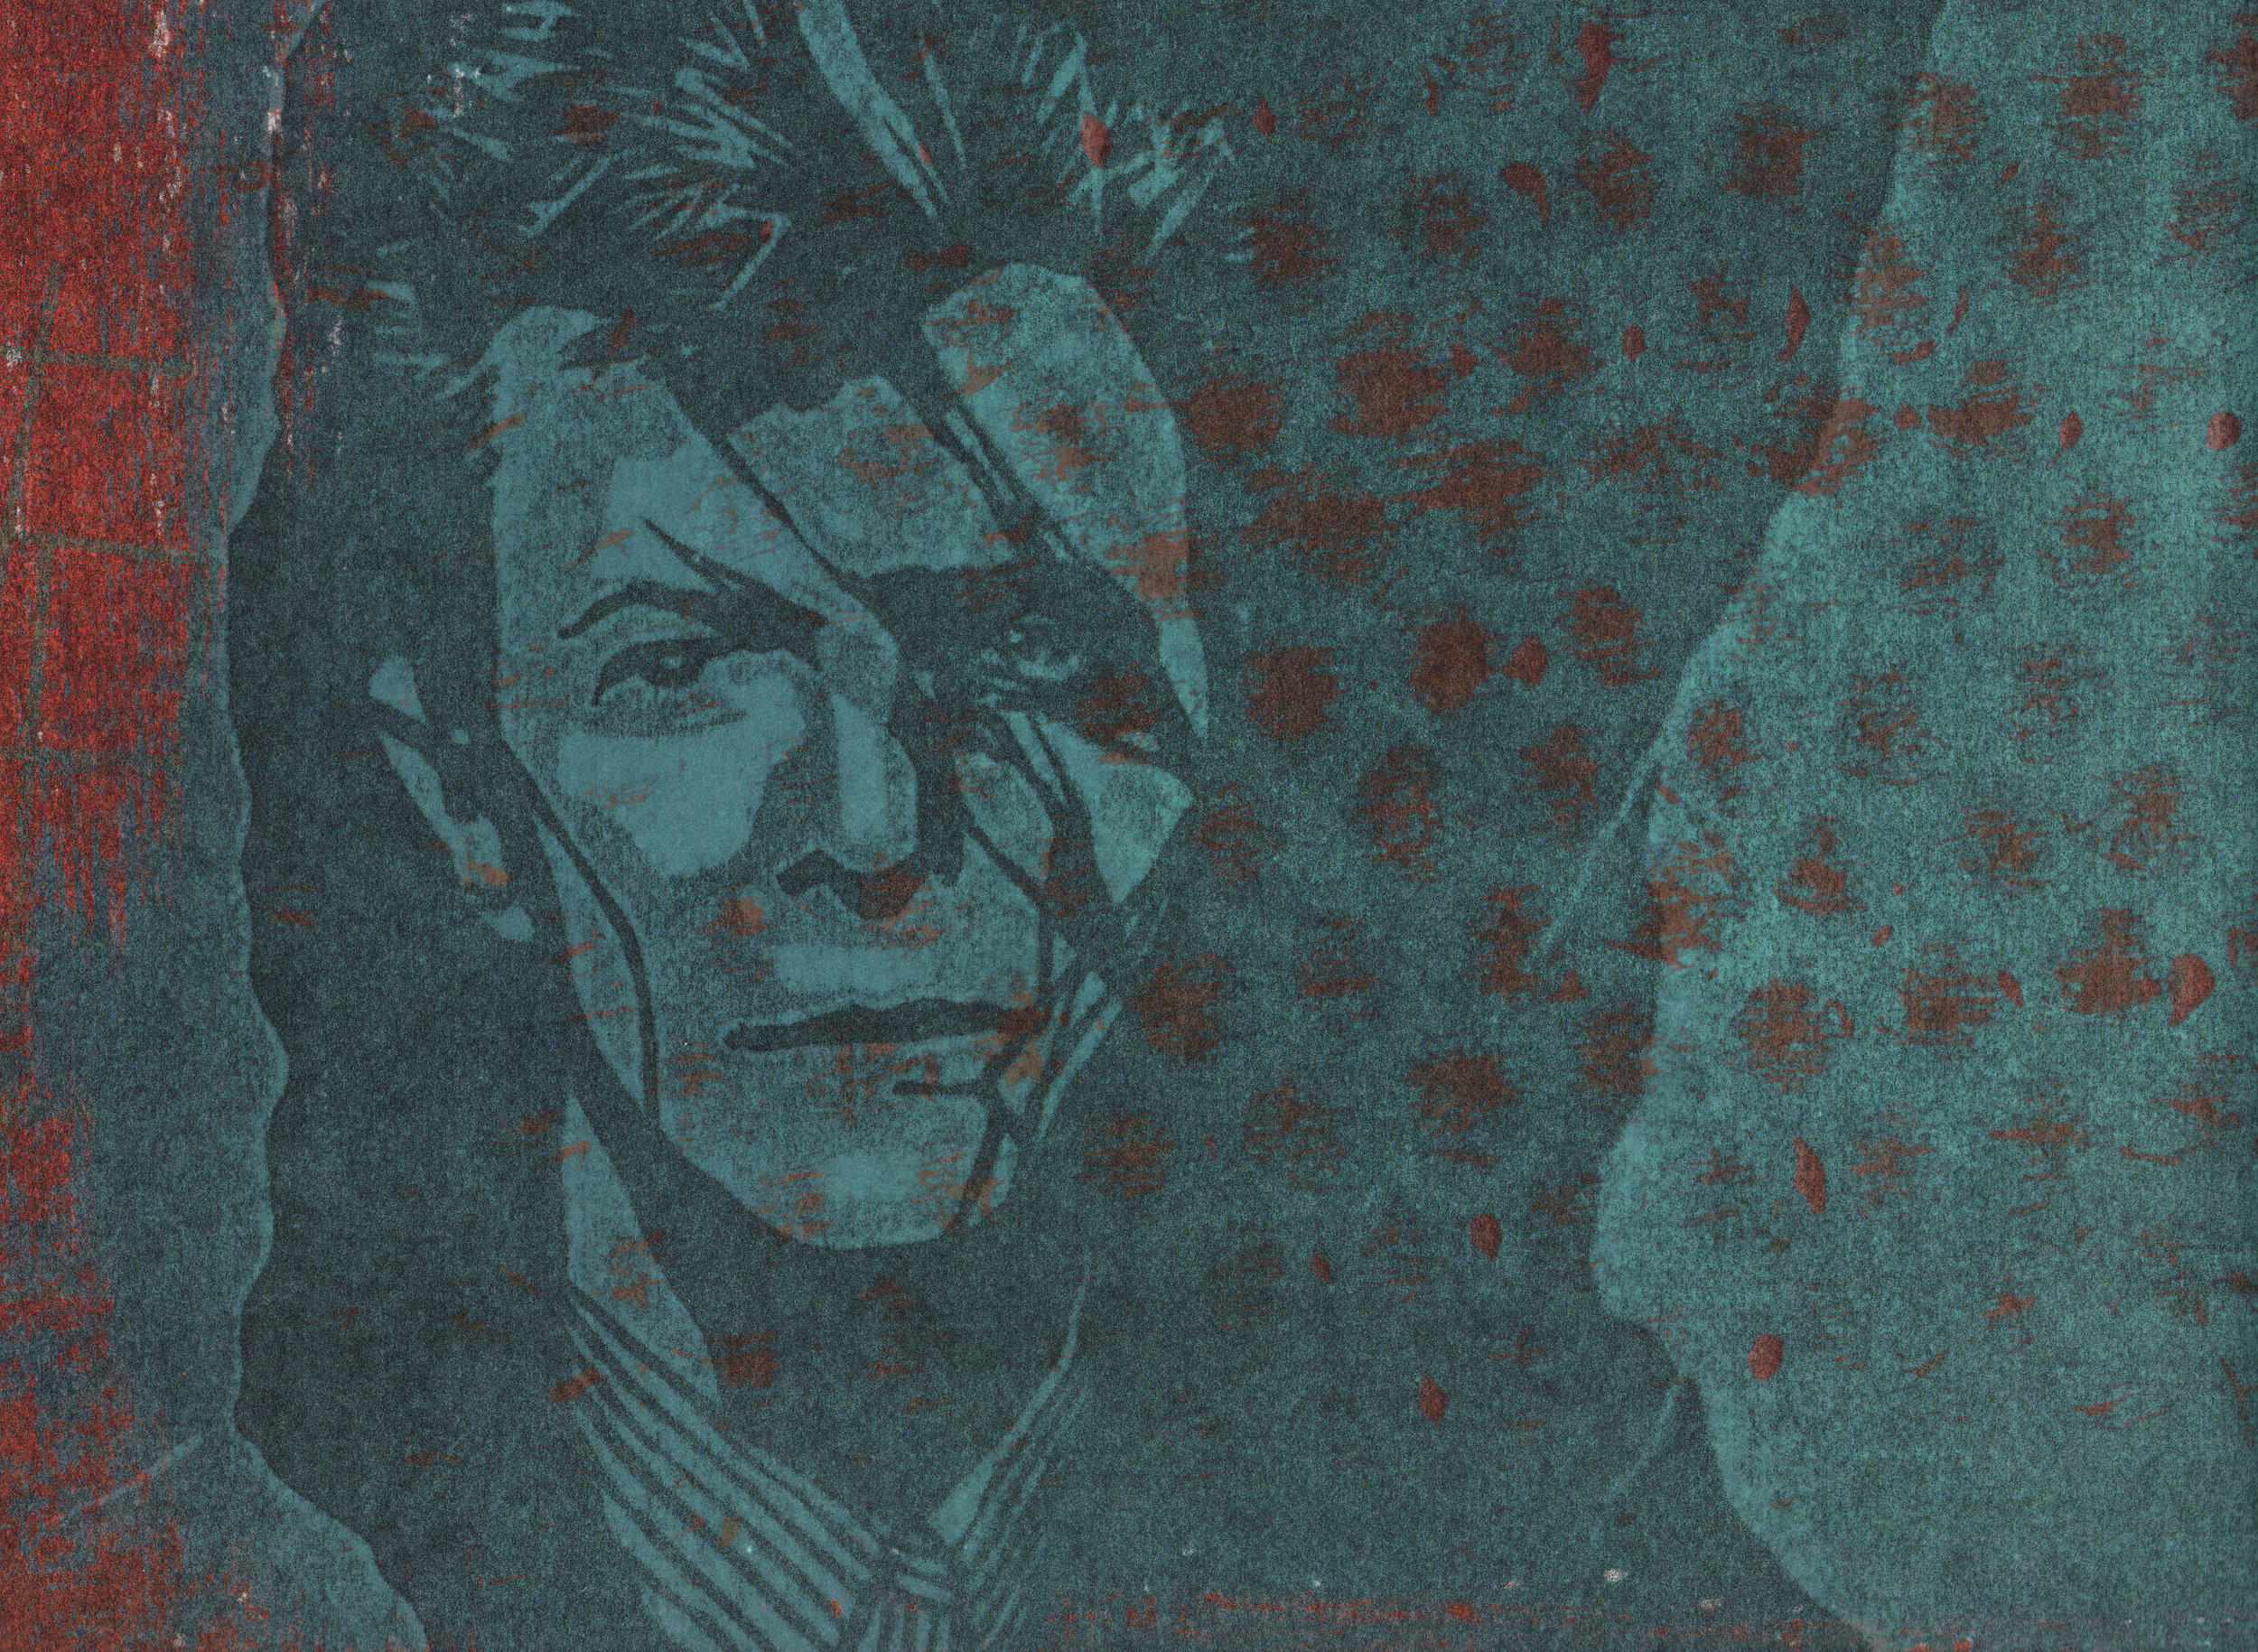 The Ghost of David Bowie